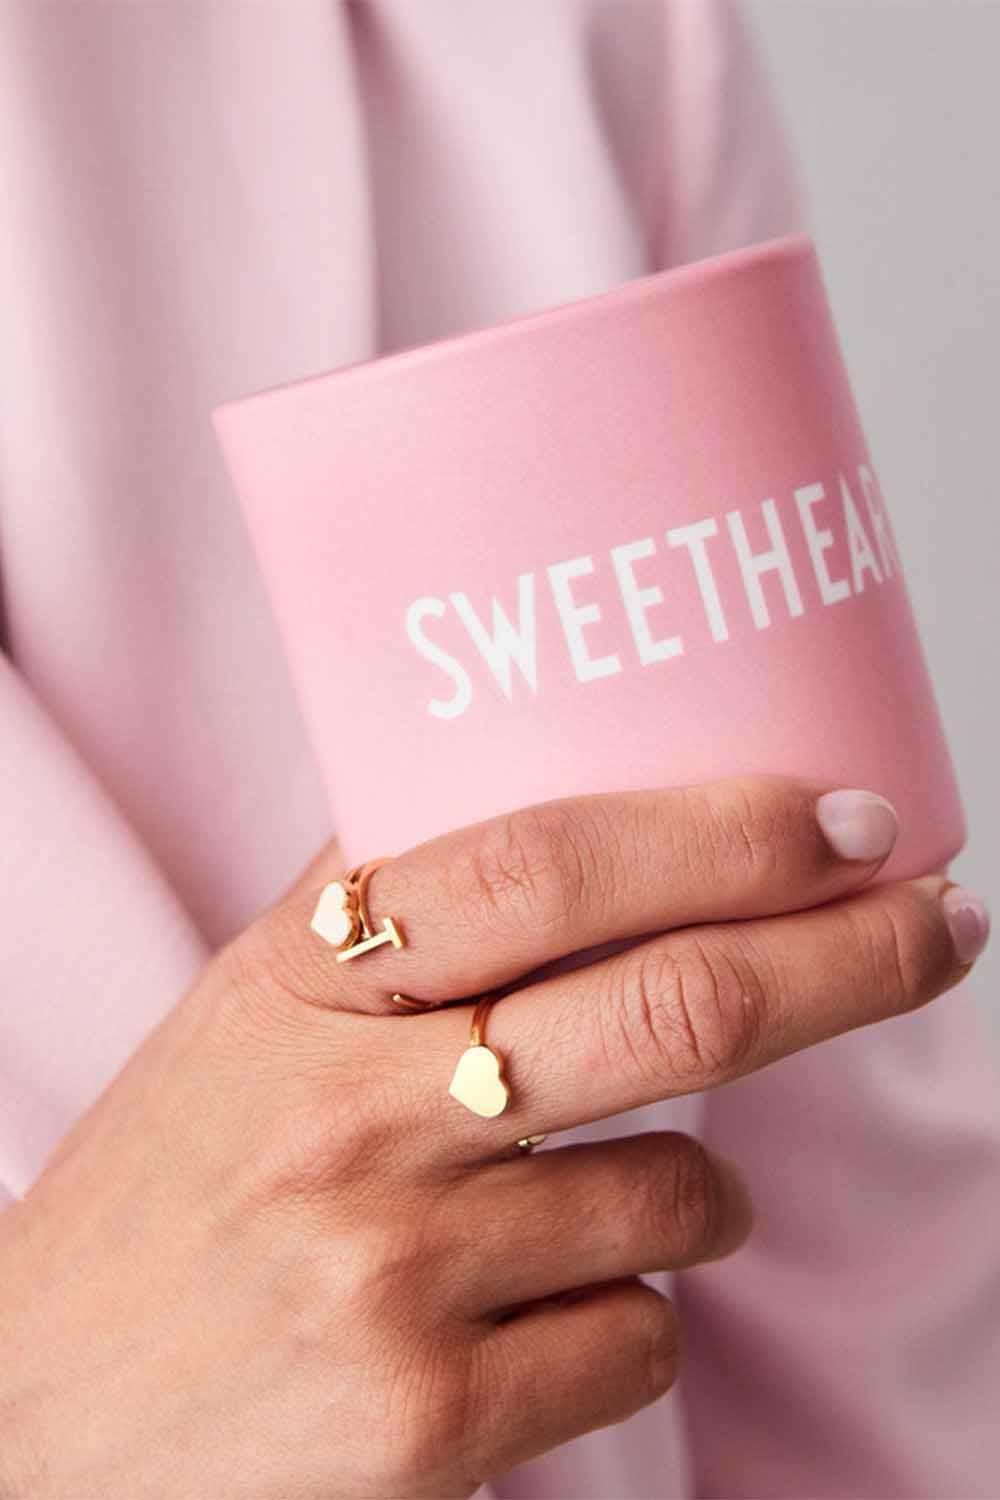 Favourite Cups - Sweetheart